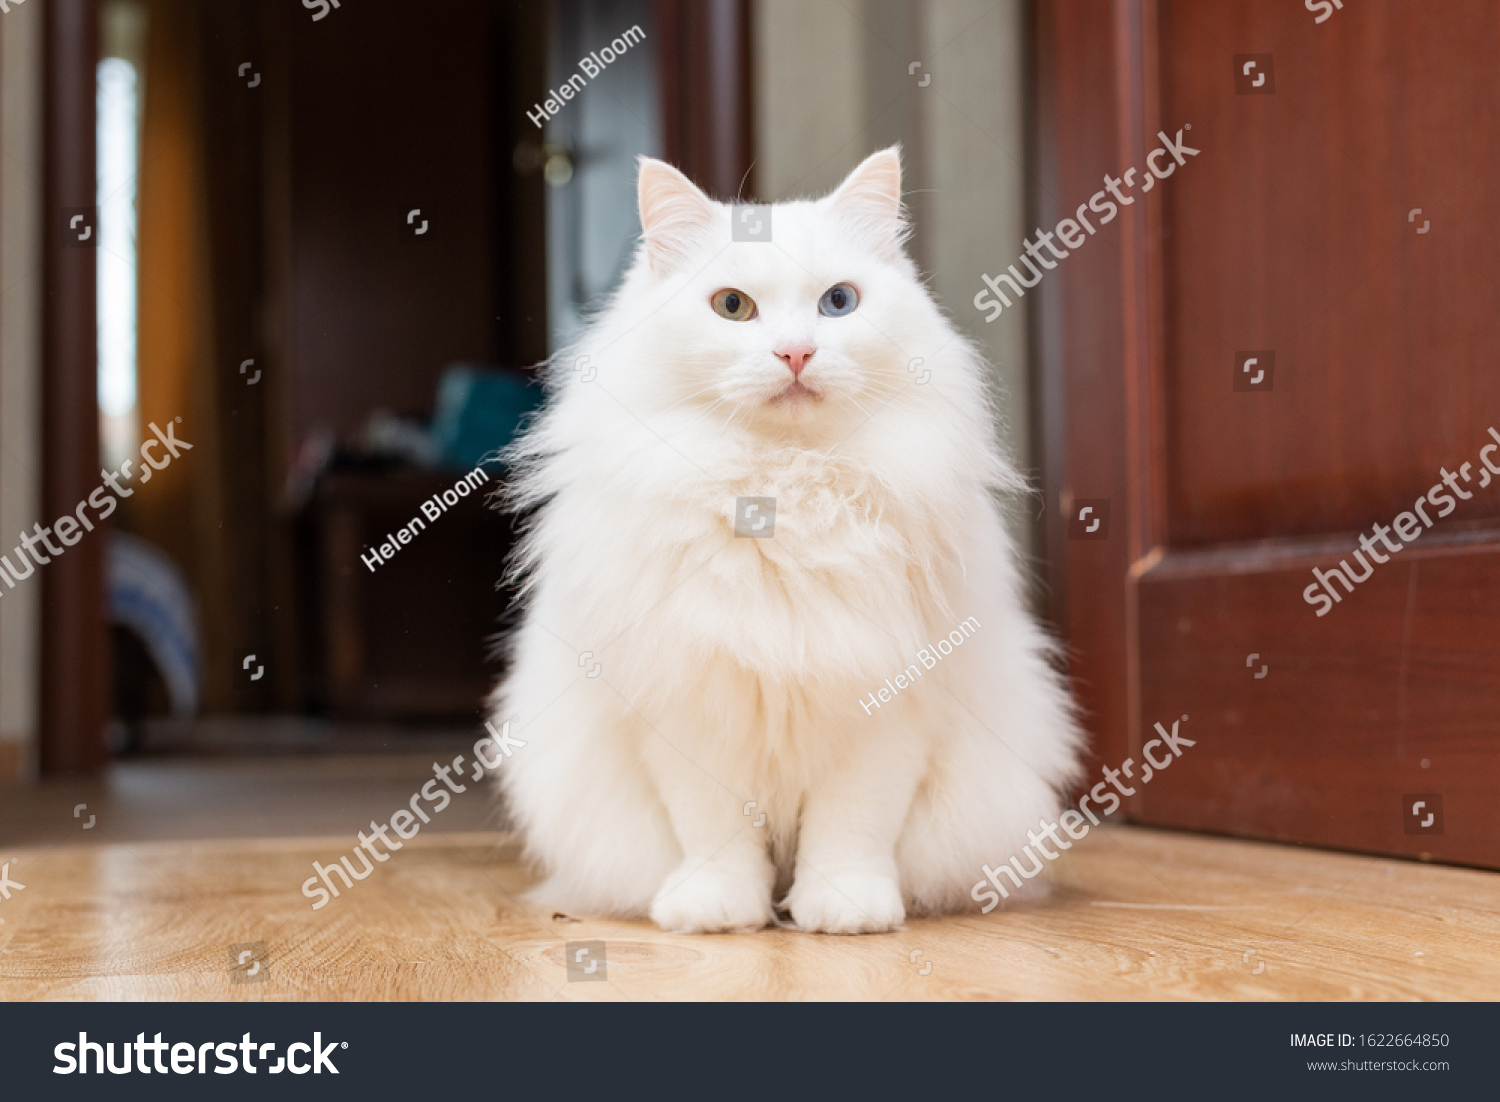 White fluffy turkish angora cat with different eyes closeup portrait. Close up photo of white cat in flat on a wooden flor #1622664850